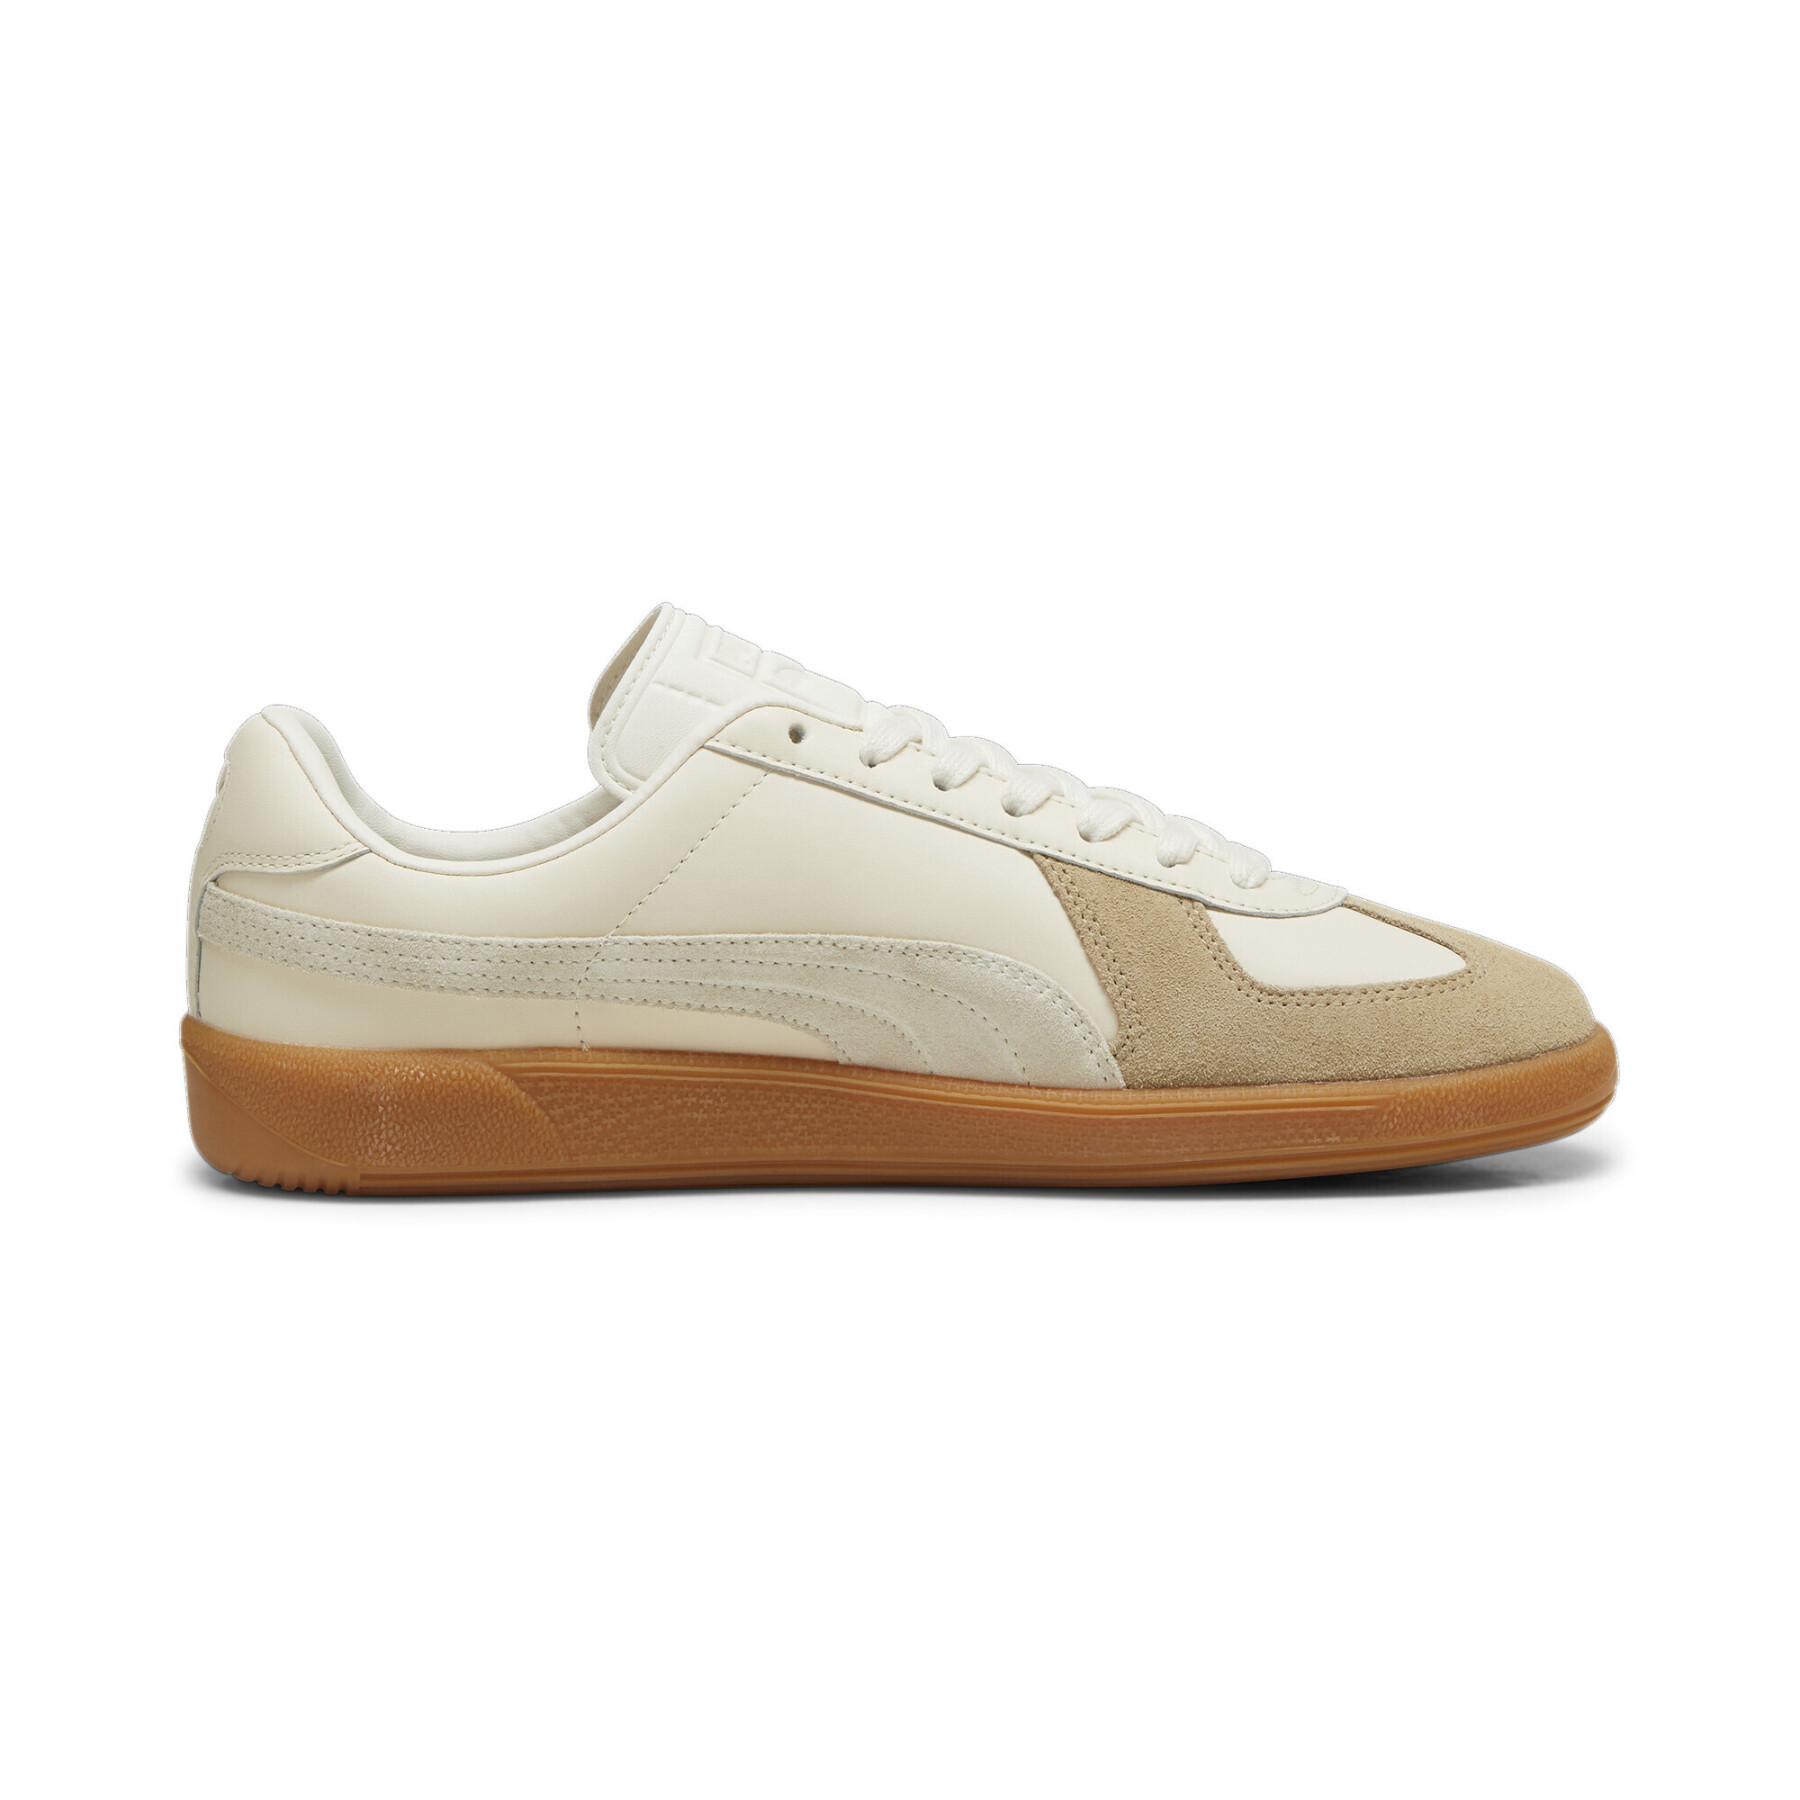 Sneakers Puma Army Trainer